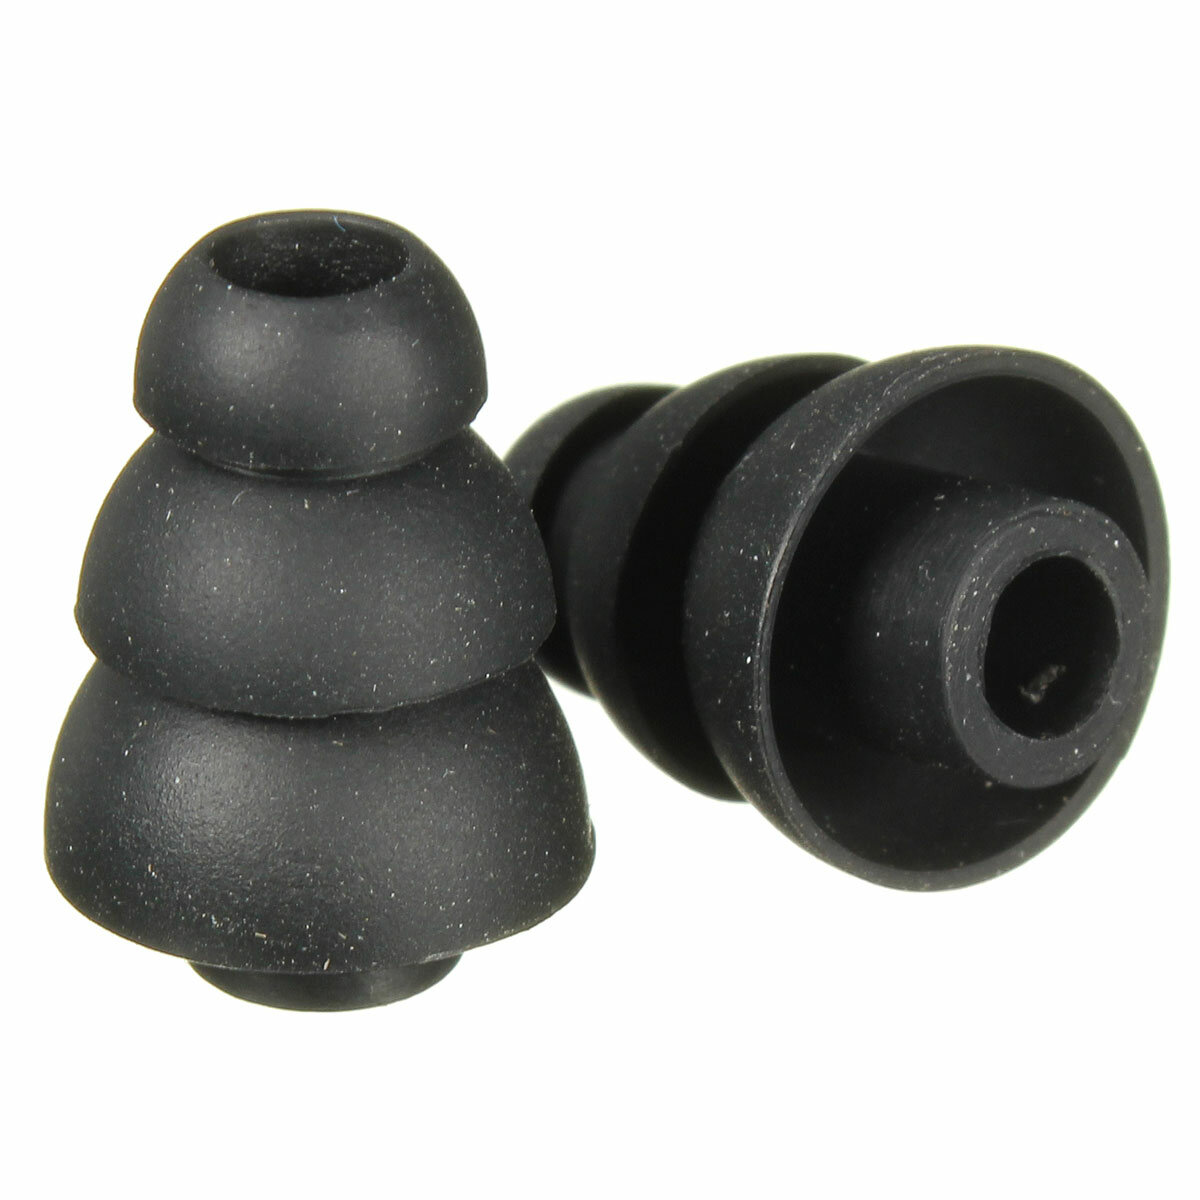 Large 2pcs Three Layer Silicone In-Ear Earphone Covers Cap Replacement Earbud Bud Tips Earbuds Eartips Earplug Ear Pads COD